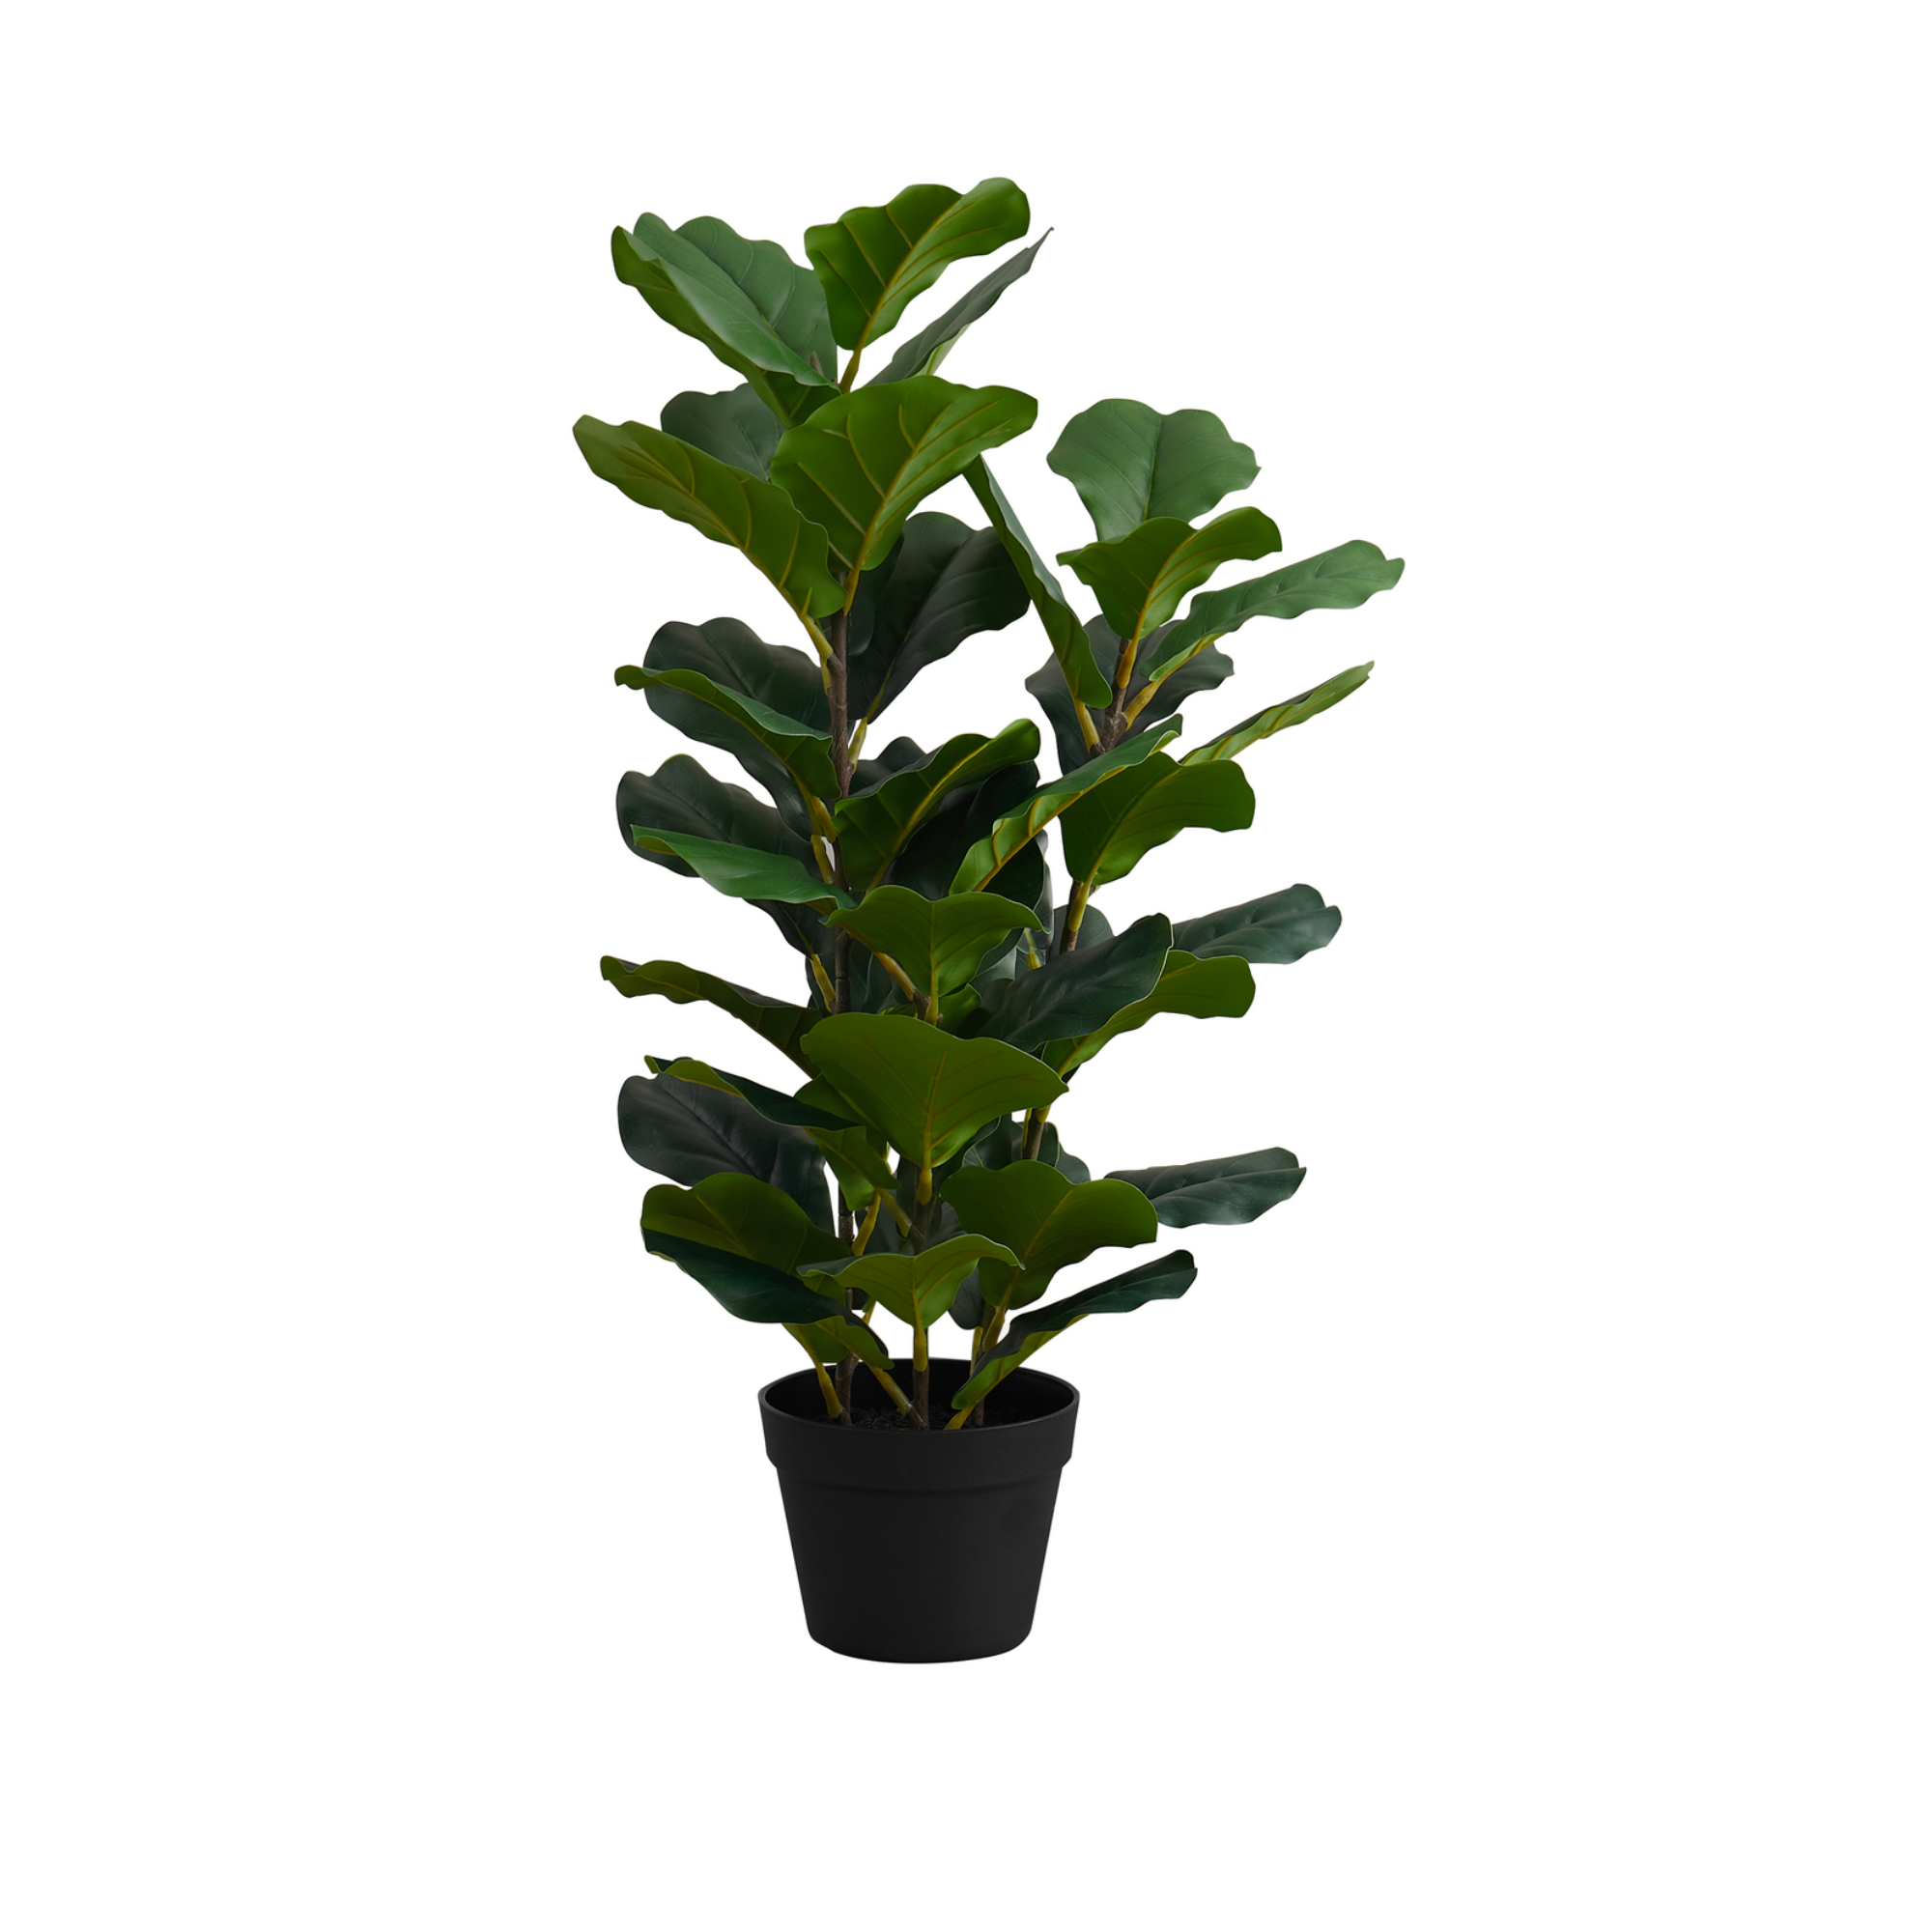 ARTIFICIAL PLANT - 32"H / INDOOR FIDDLE IN A 6" POT